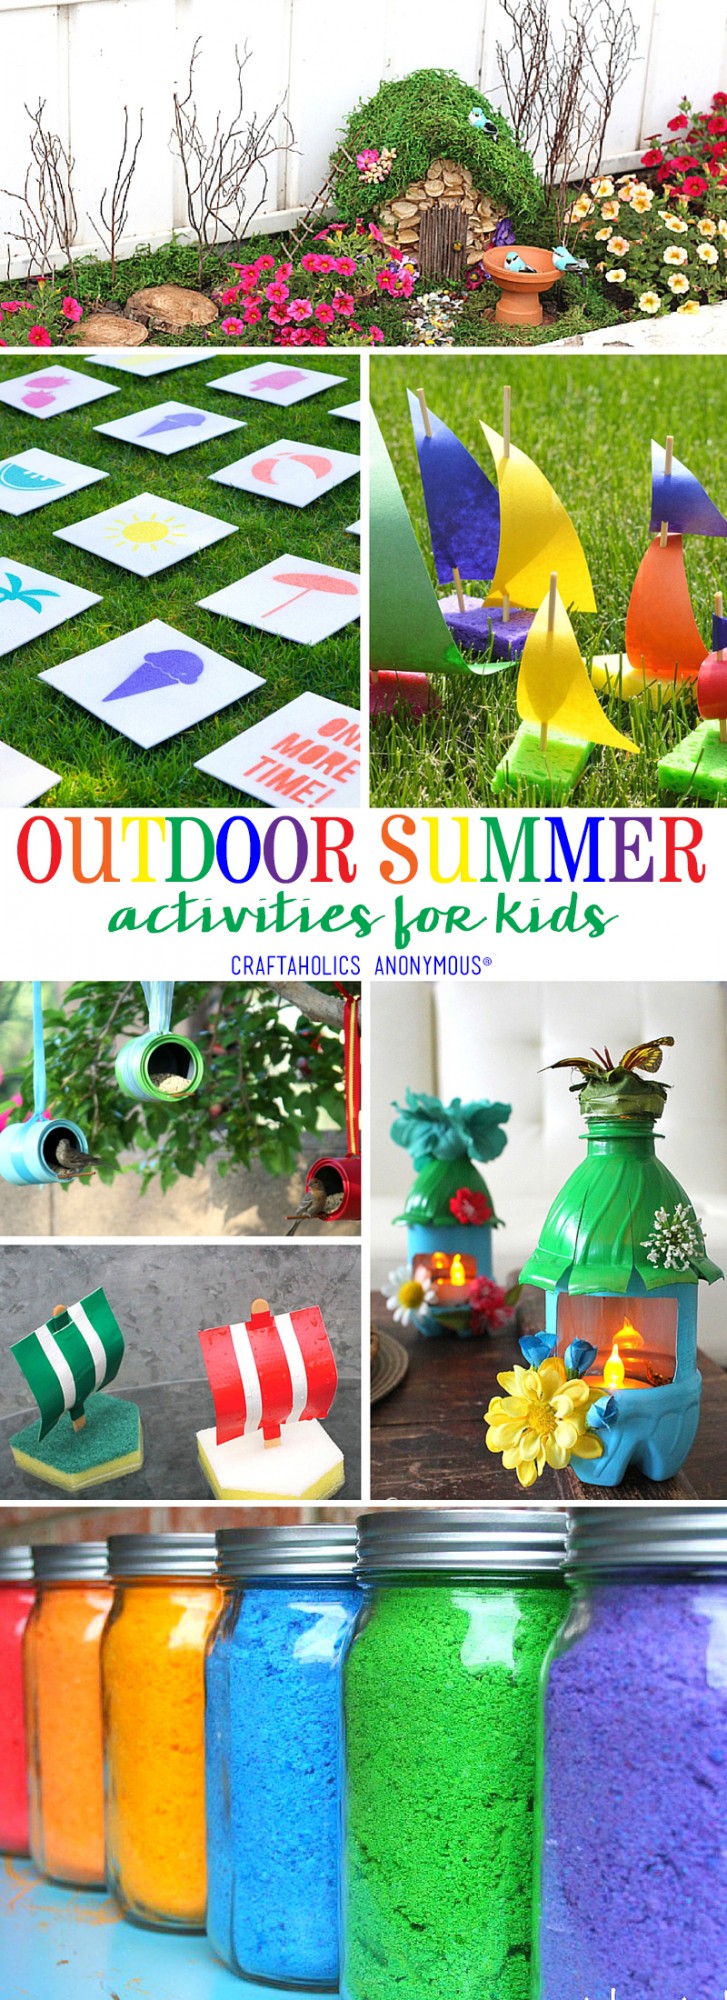 Outdoor Summer Activities for Kids at Craftaholics Anonymous